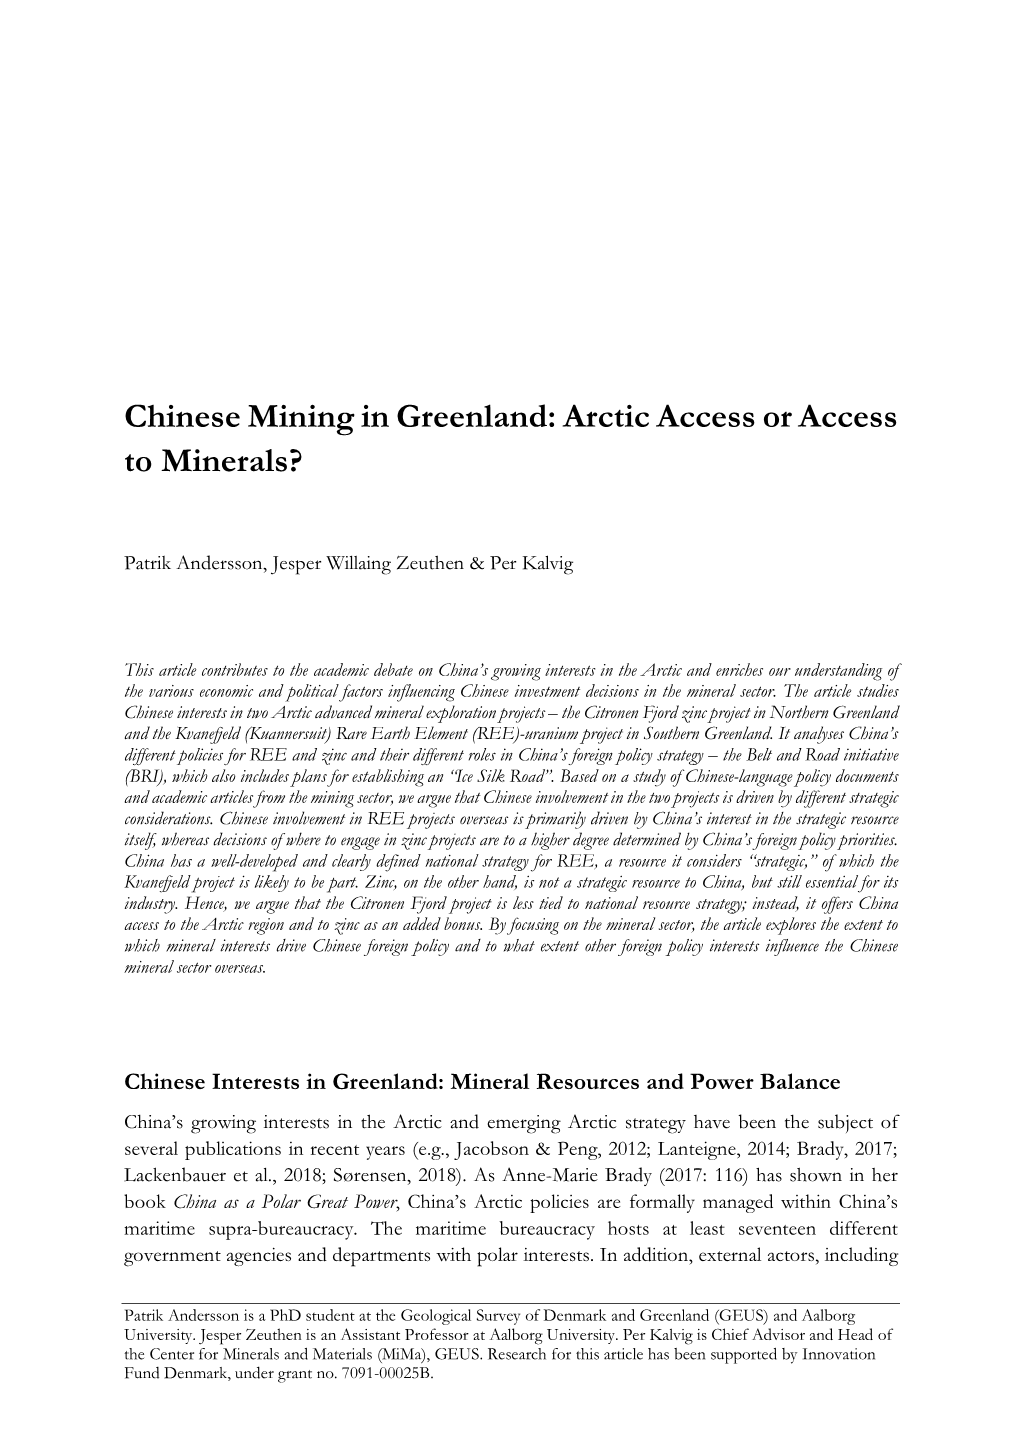 Chinese Mining in Greenland: Arctic Access Or Access to Minerals?